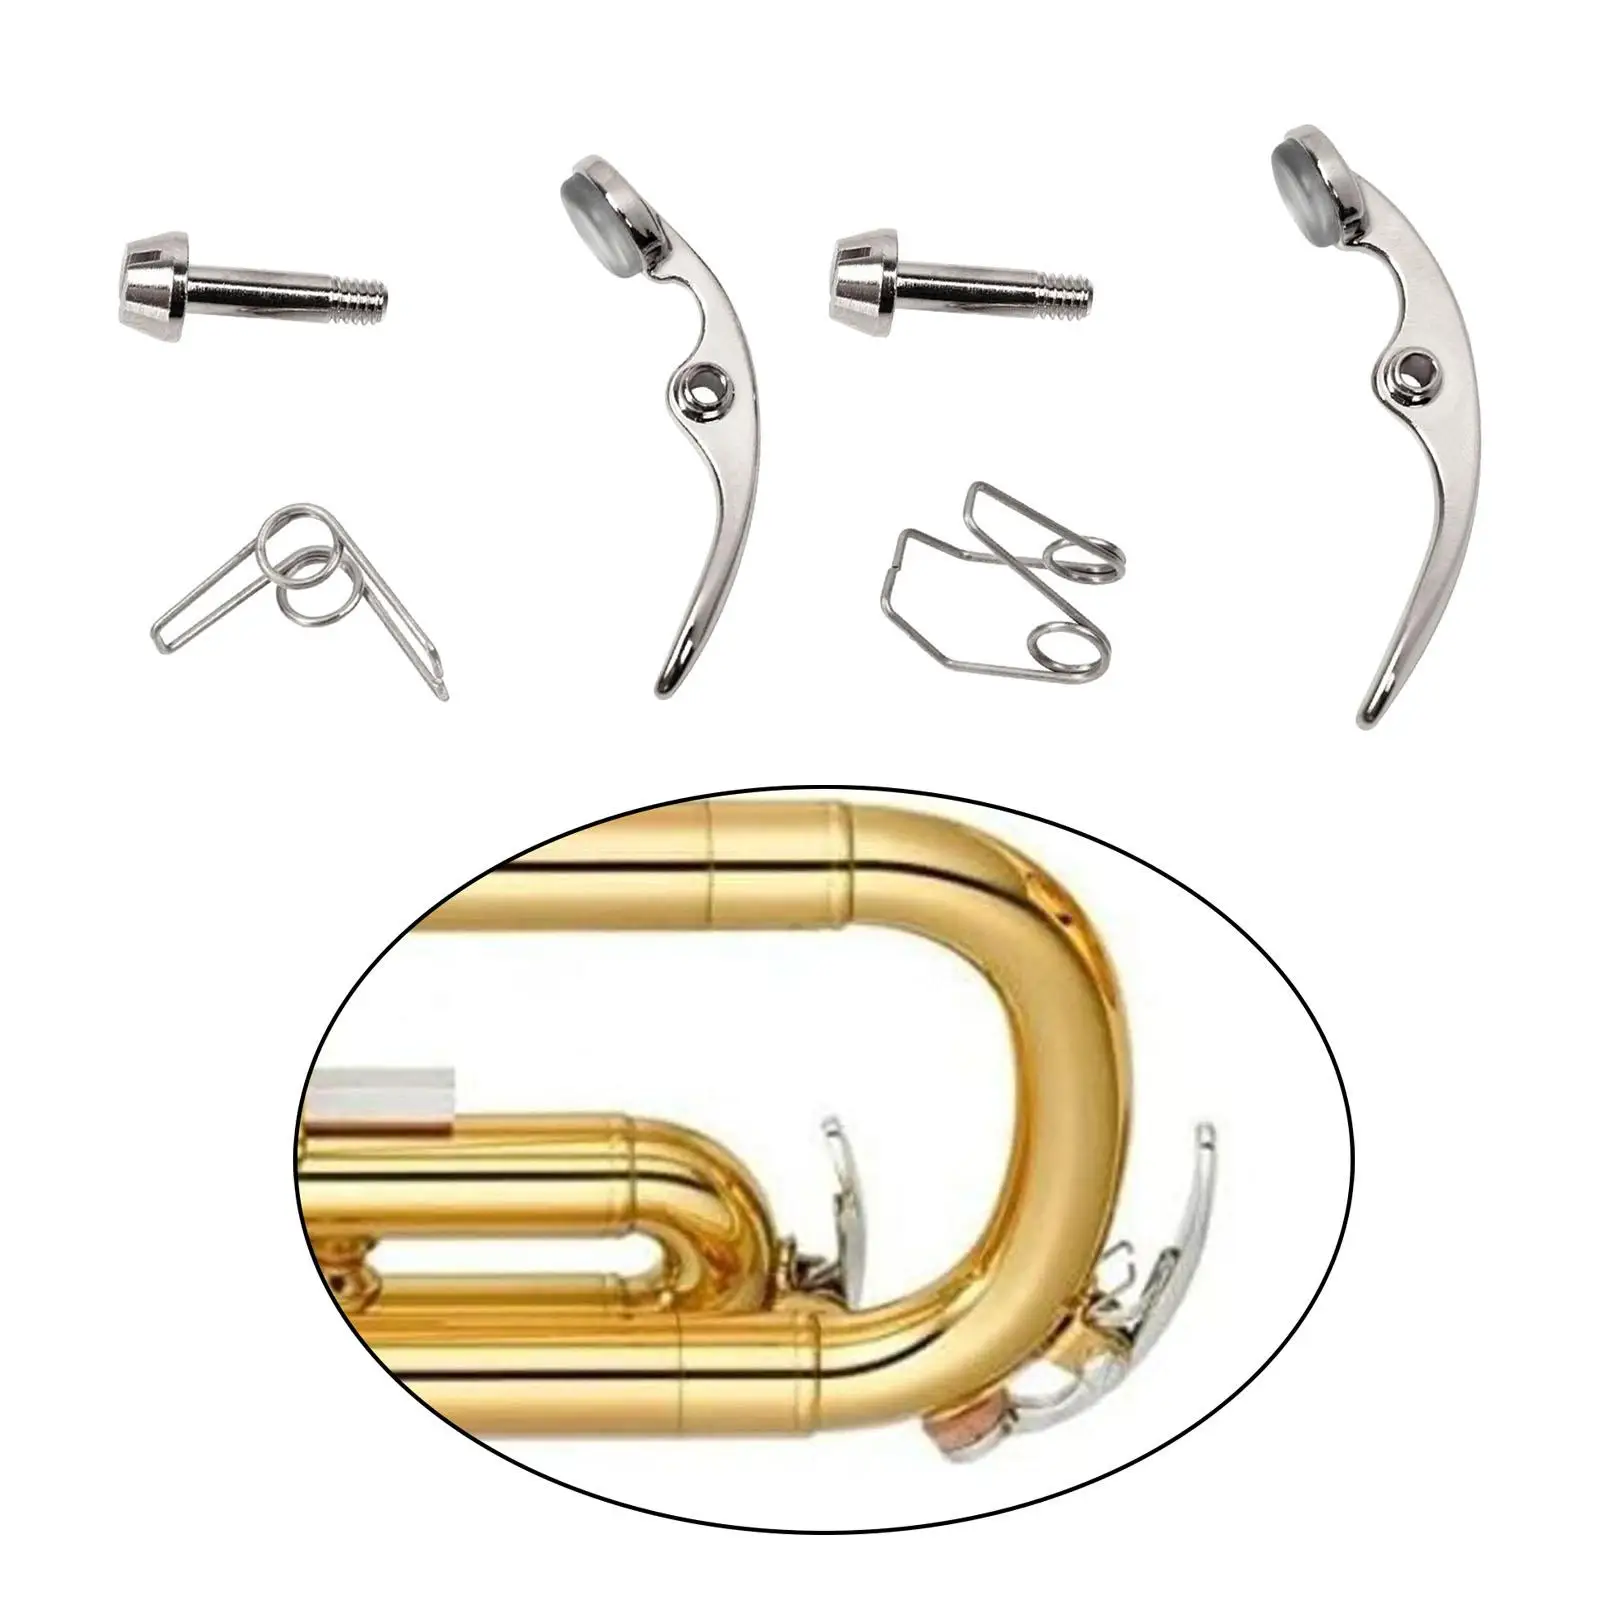 Trumpet Spit Valve Wind Instruments Accessory Water Value Valve with Springs Screws Drain Valve Key for Trumpet Brass Instrument